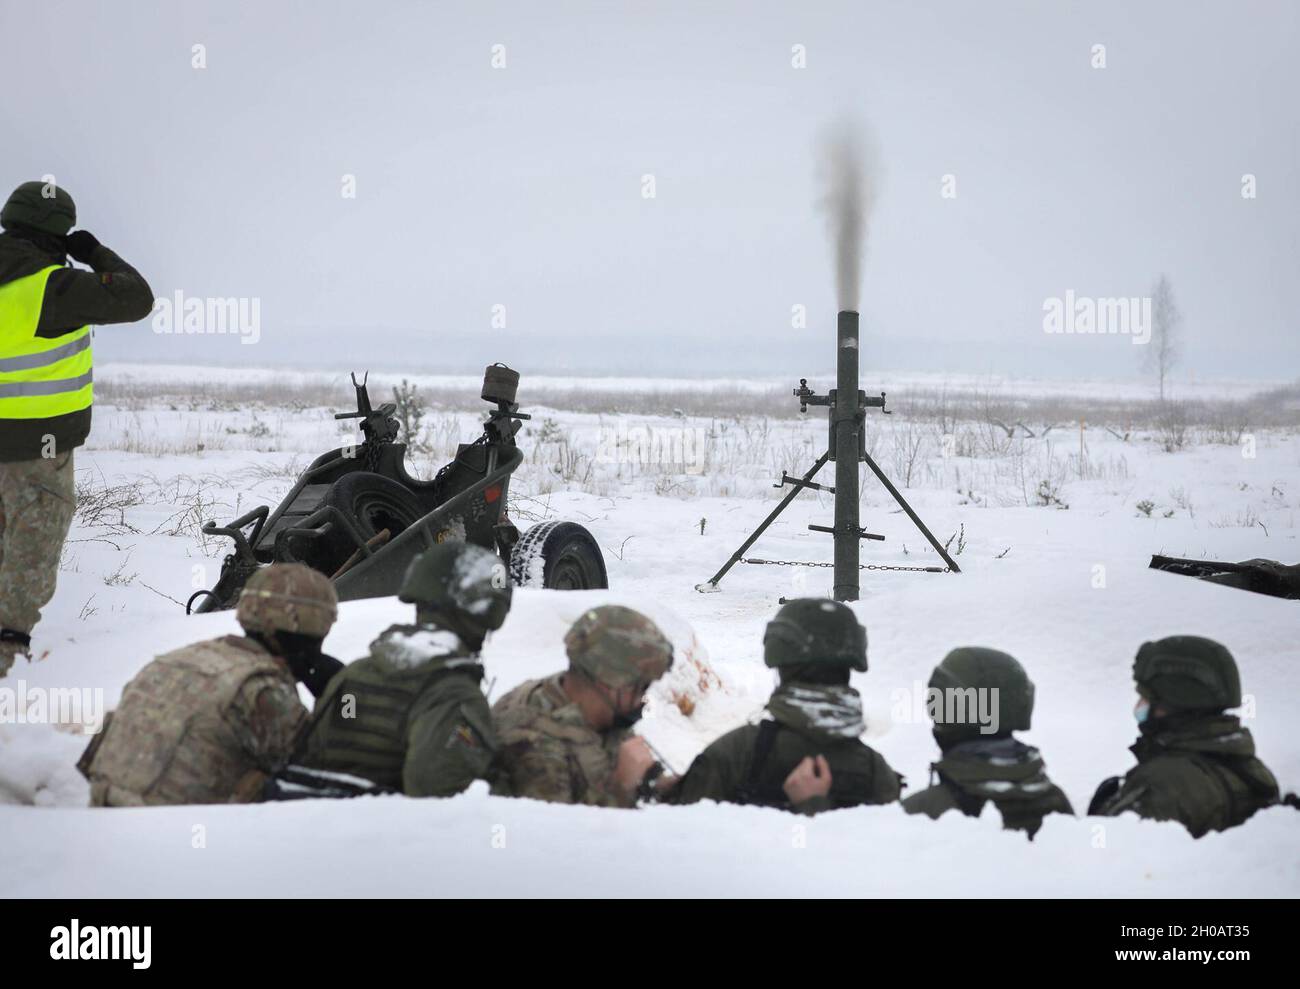 U.S. Capt. Spenser Swafford, 2nd Battalion, 8th Cavalry Regiment fire support officer, fires a Lithuanian 120 mm mortar system during a joint training events Jan. 31, 2021, at Kazlu Ruda, Lithuania. The base is the home of the 22nd Battalion of the Lithuanian Land Forces Motorized Infantry “Griffin” Brigade. Lithuanian and U.S. mortar teams were able to get hands-on experience with each other’s mortar systems. While the systems are similar, there are small differences between each system. Stock Photo